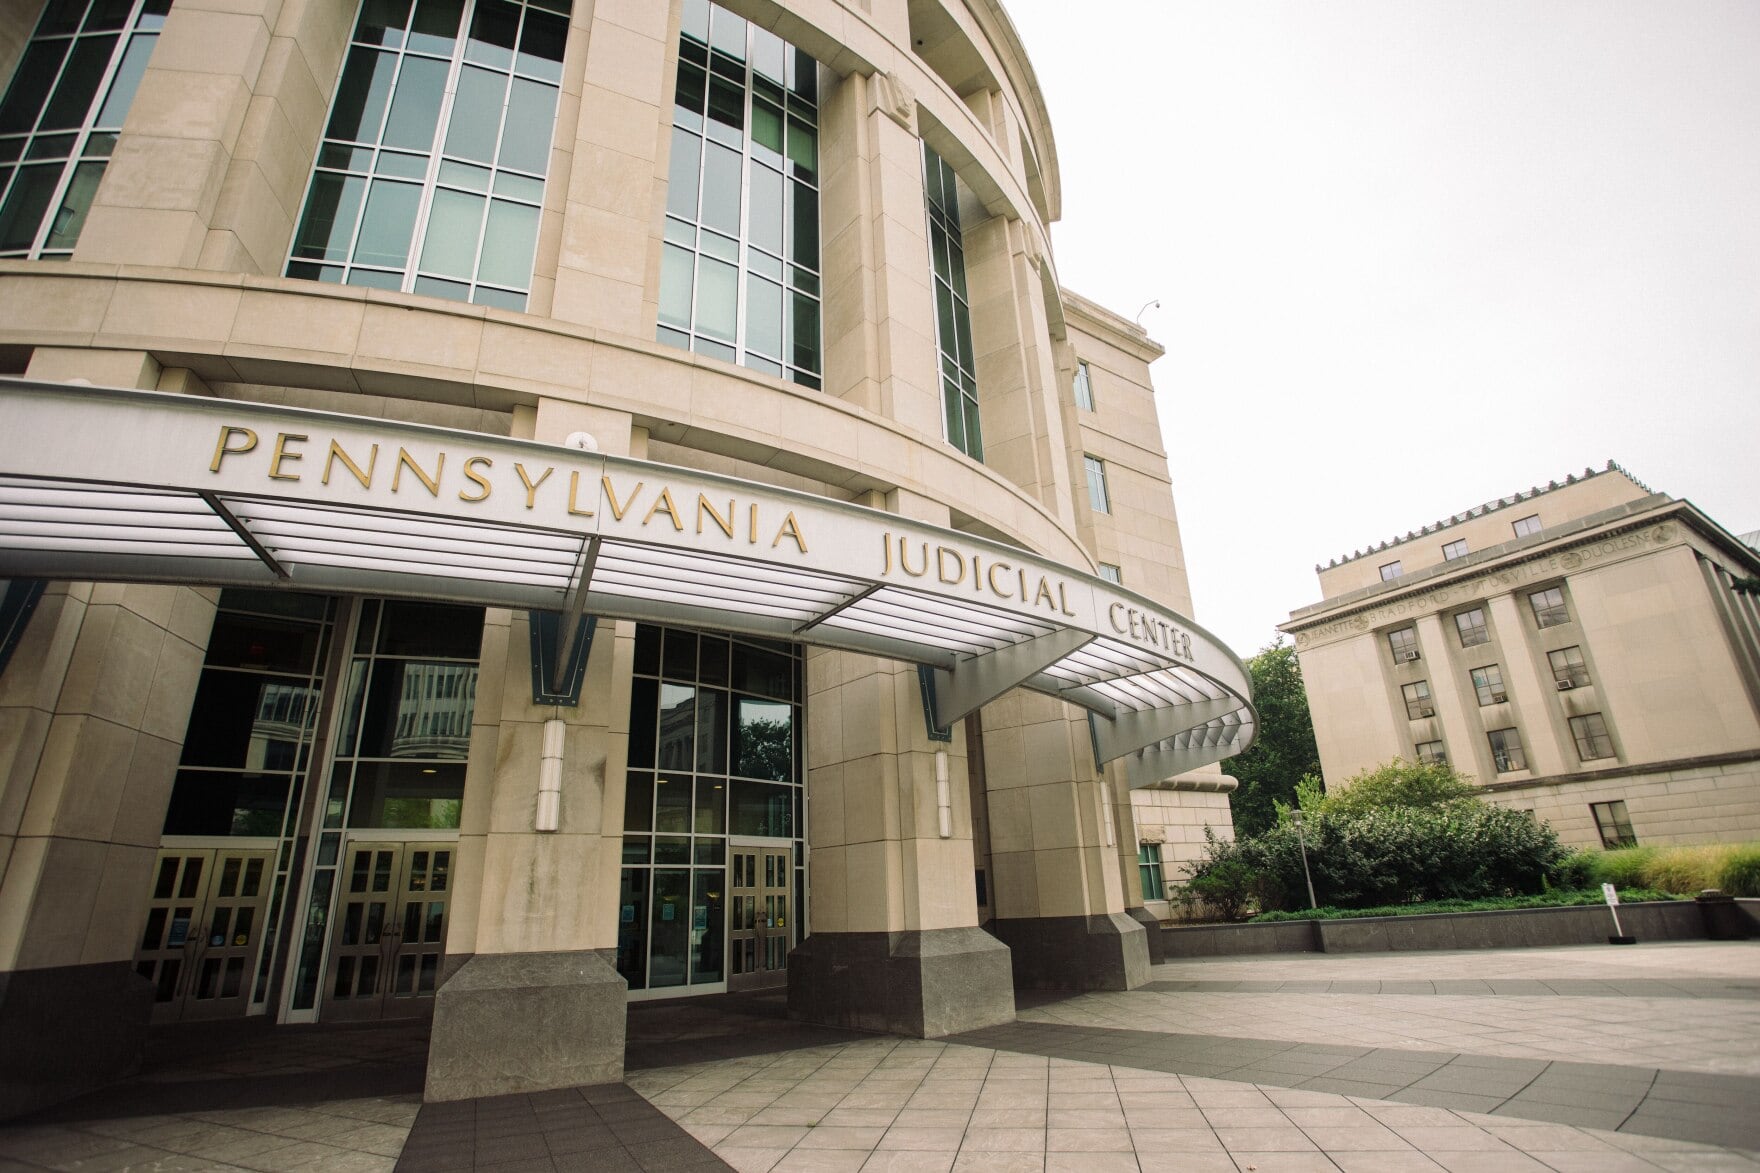 The front of Pennsylvania Judicial Center building in Harrisburg.